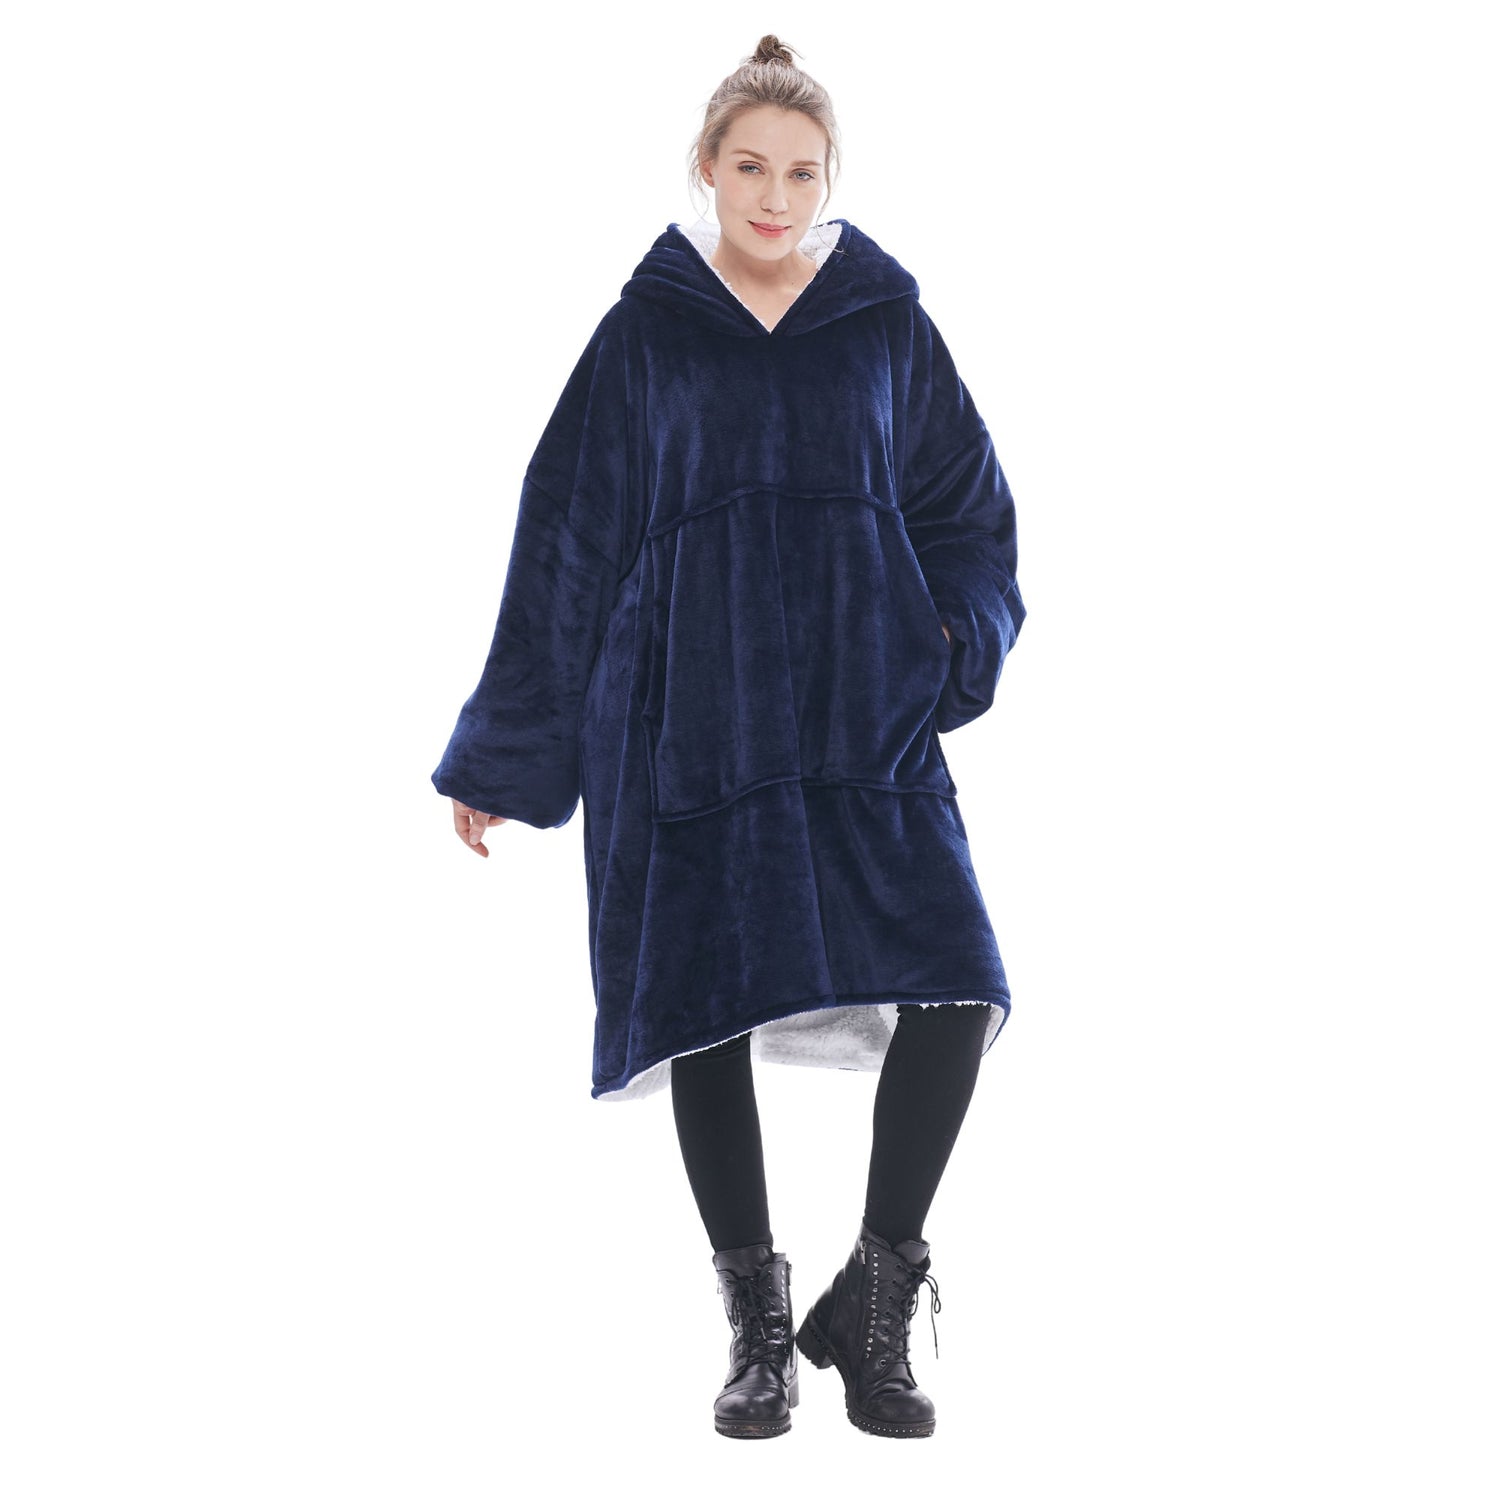 The Oversized Hoodie® woman giant large size long XL XXL thick navy blue 